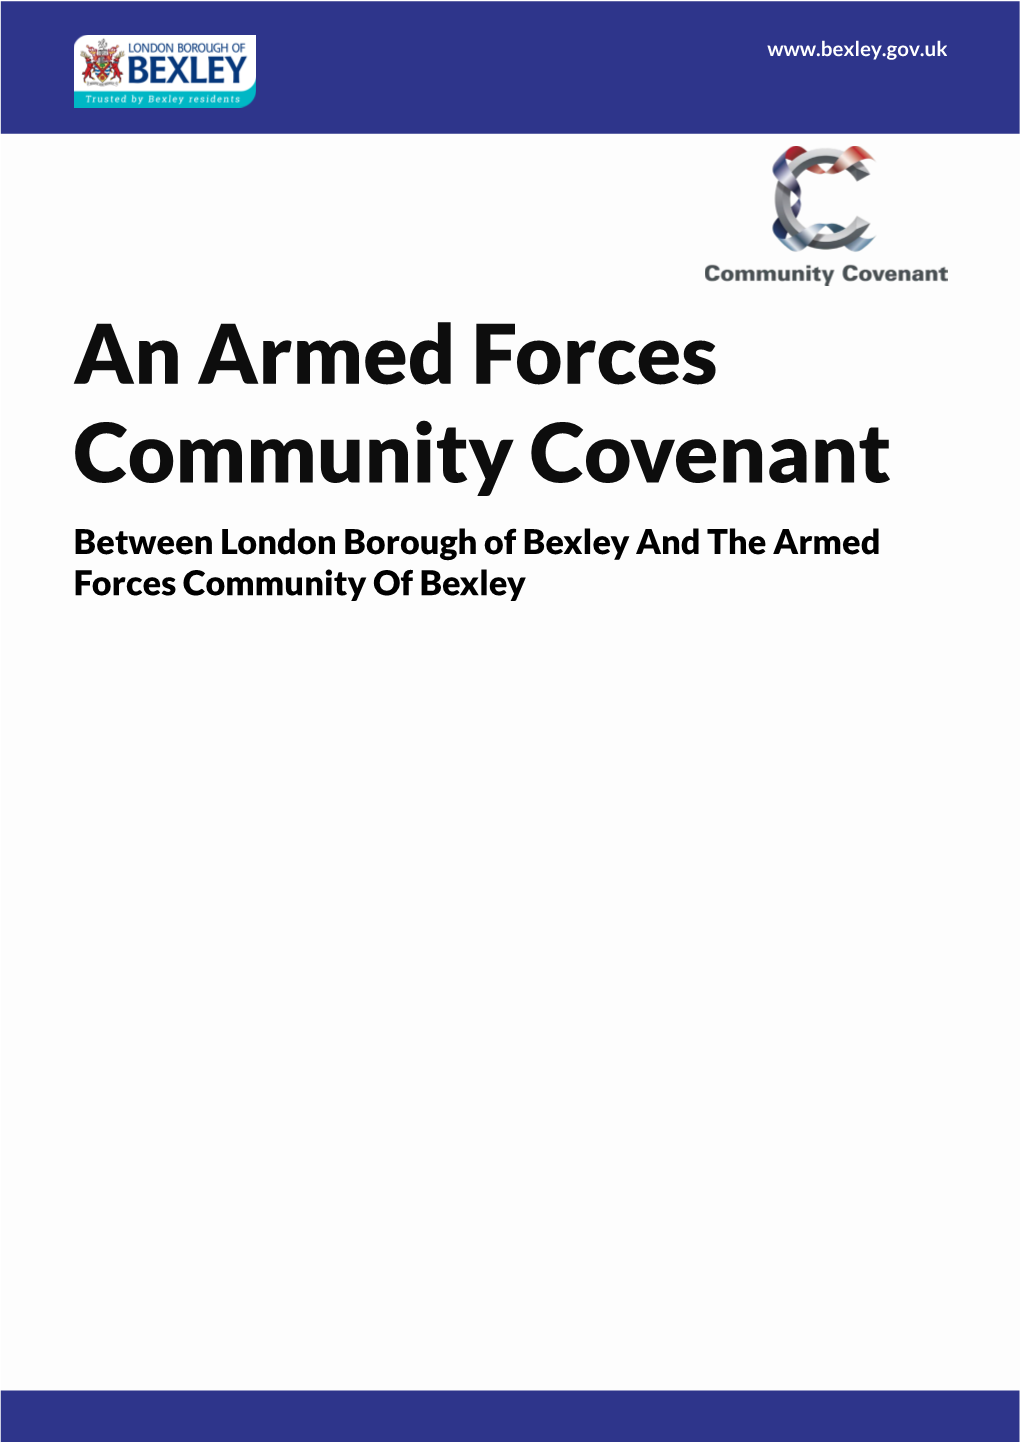 Armed Forces Community Covenant Between London Borough of Bexley and the Armed Forces Community of Bexley